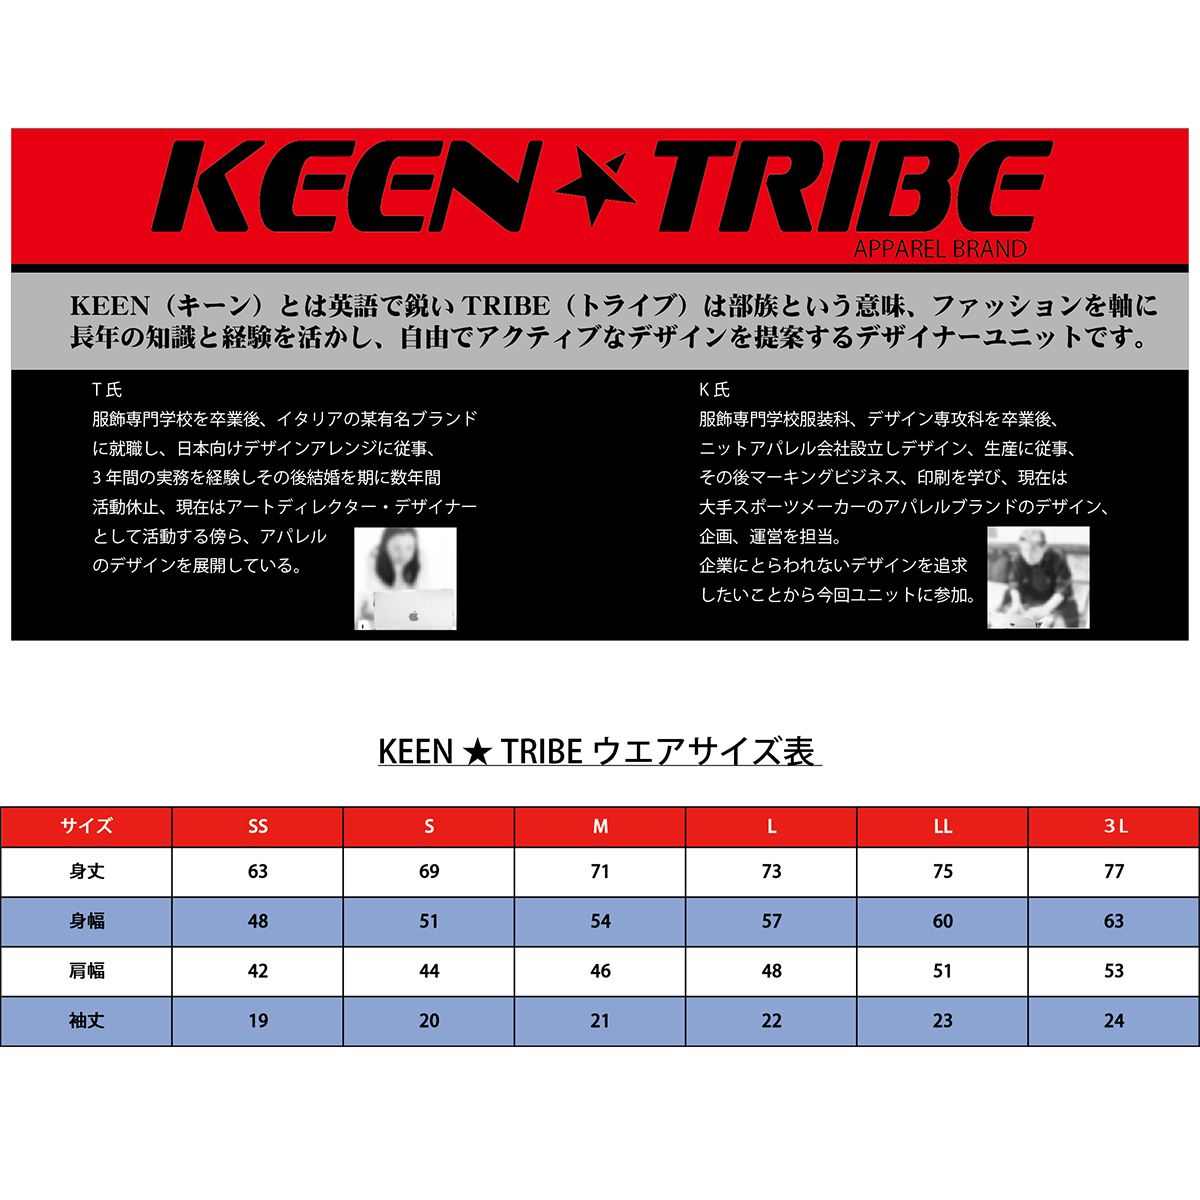 KEEN ★ TRIBE　KT-5(受注生産)